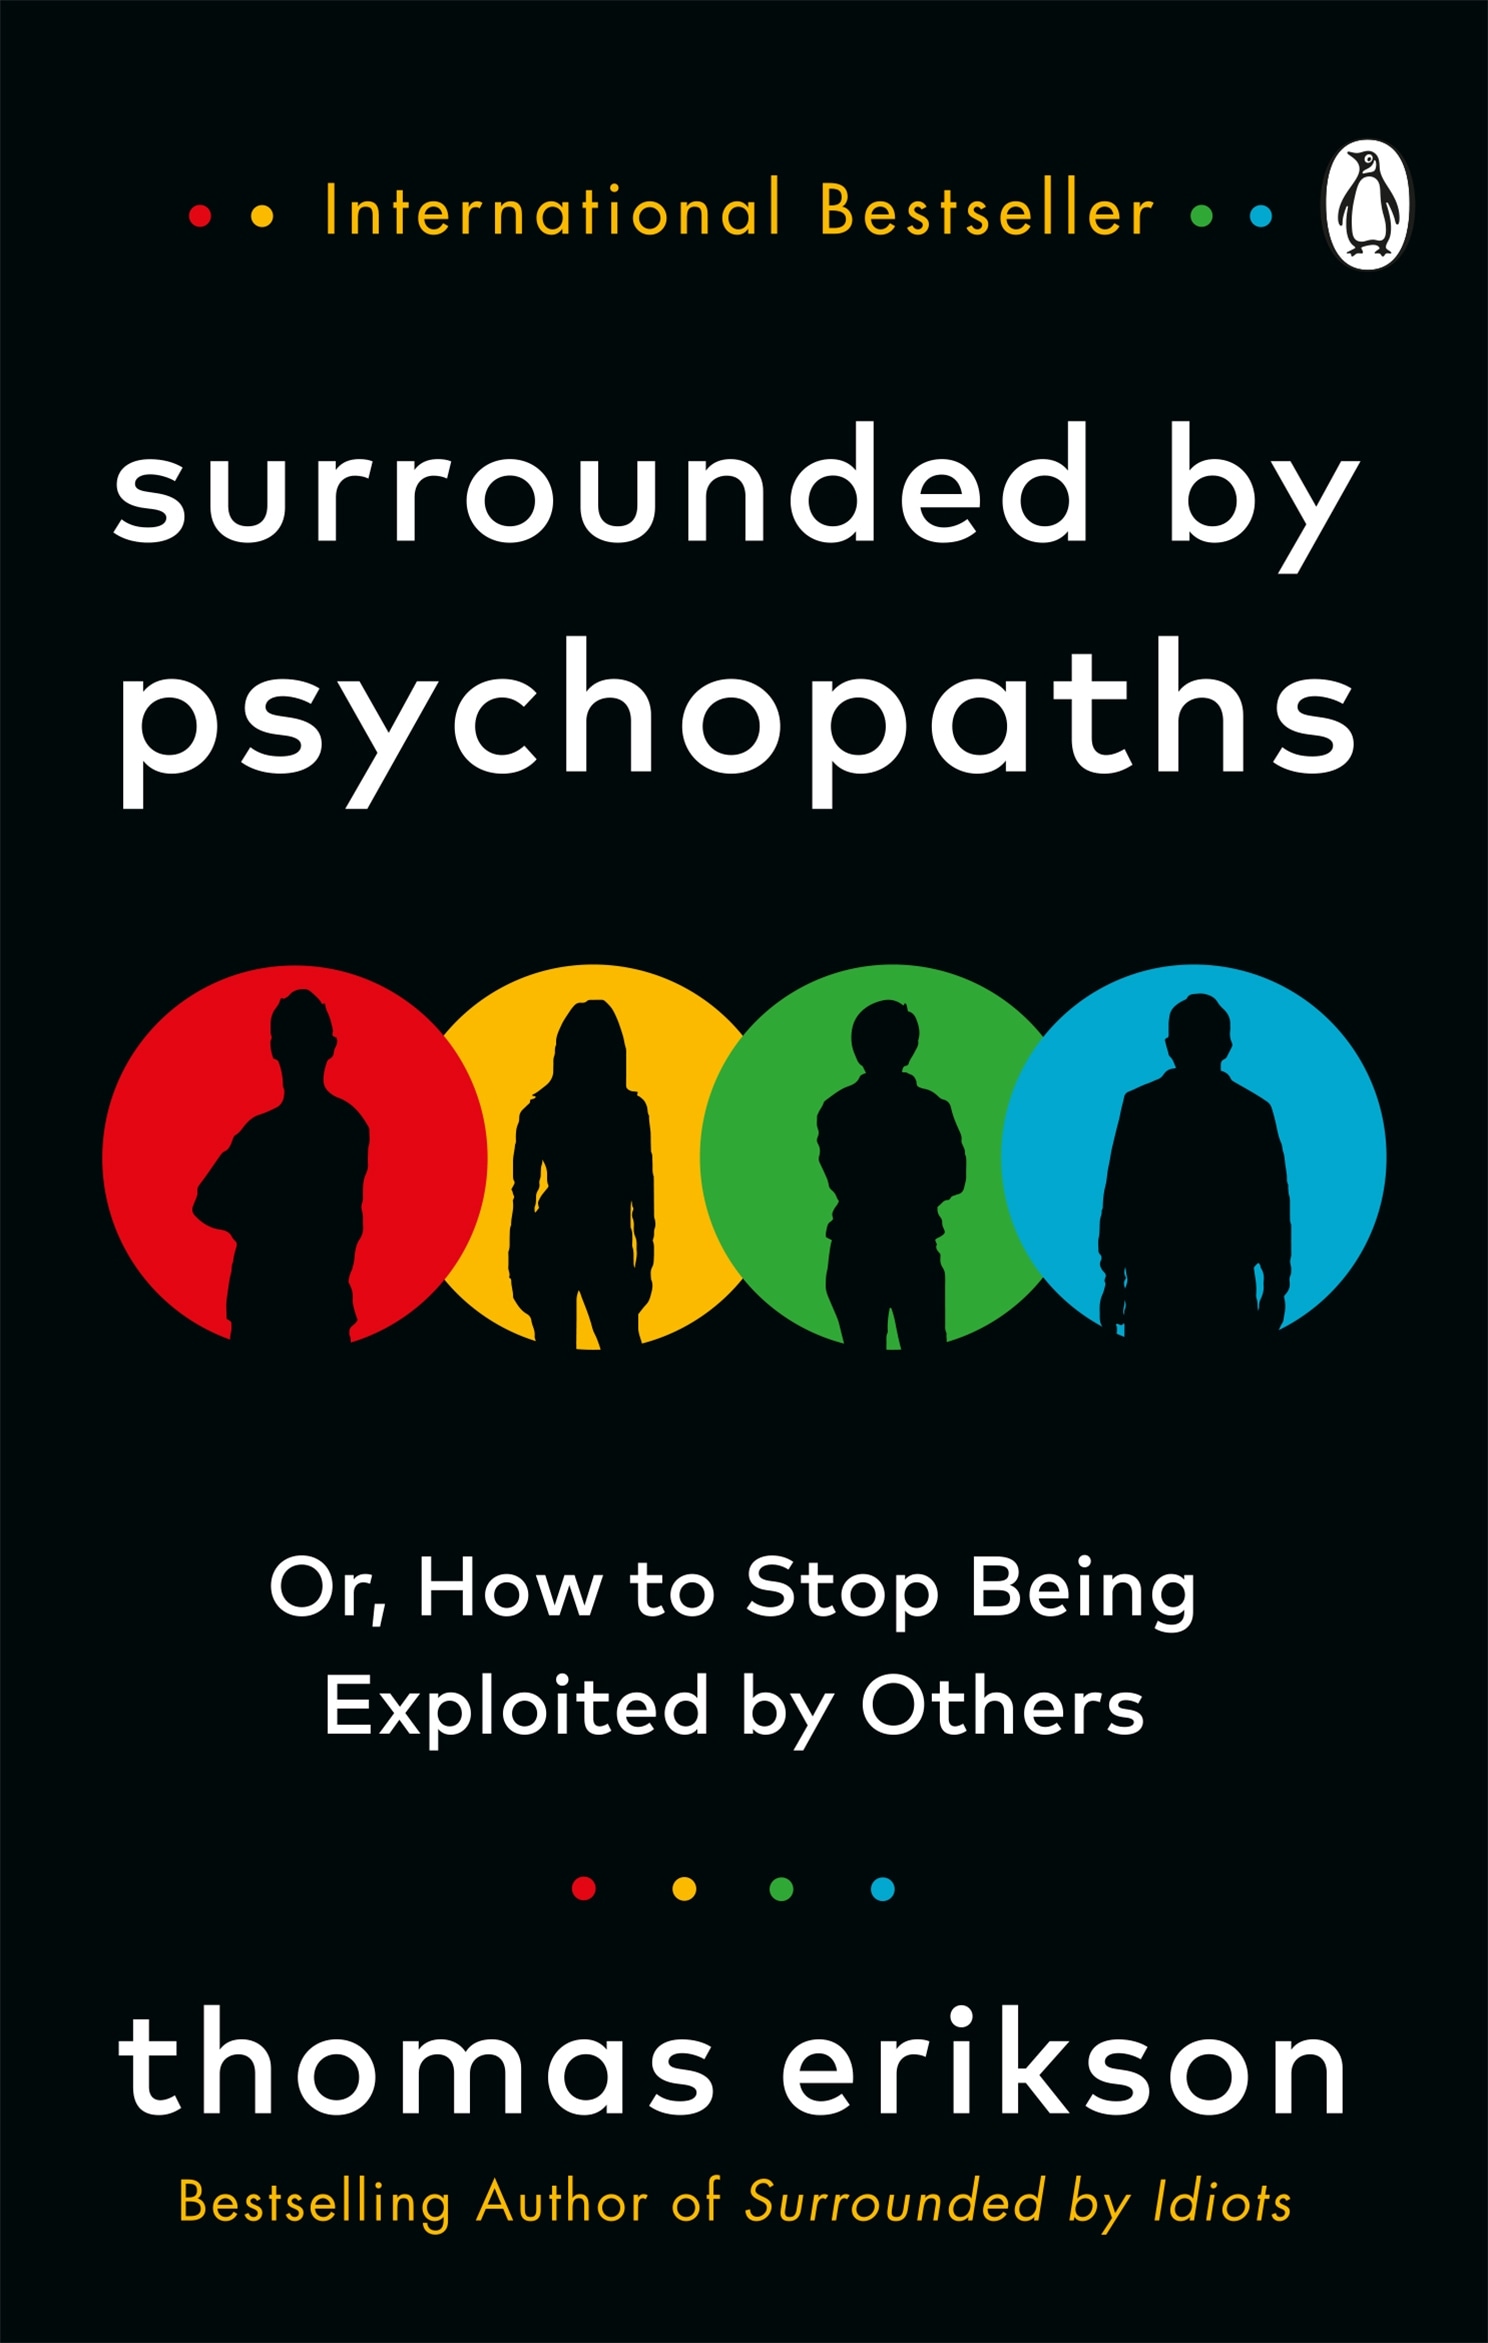 Book “Surrounded by Psychopaths” by Thomas Erikson — October 8, 2020